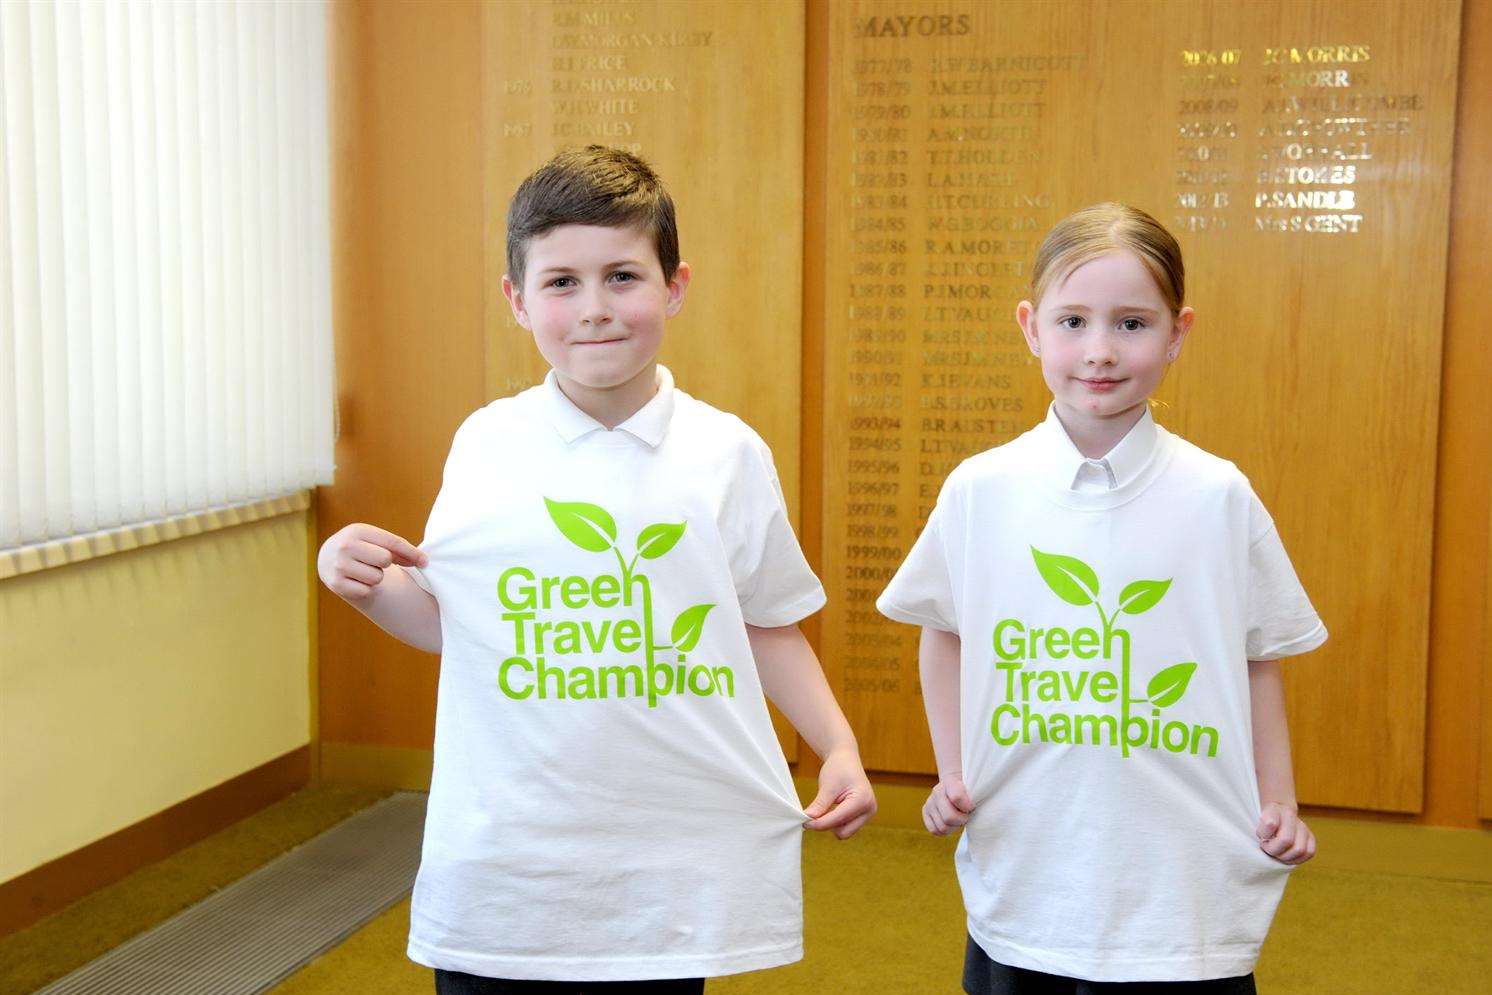 The Green Travel Champions scheme is launching in Medway on October 21 at The Central Theatre in Chatham. Children from local schools will attend to air their views on green travel and to receive delegate packs which set out activities that children can take up to become Green Travel Champions